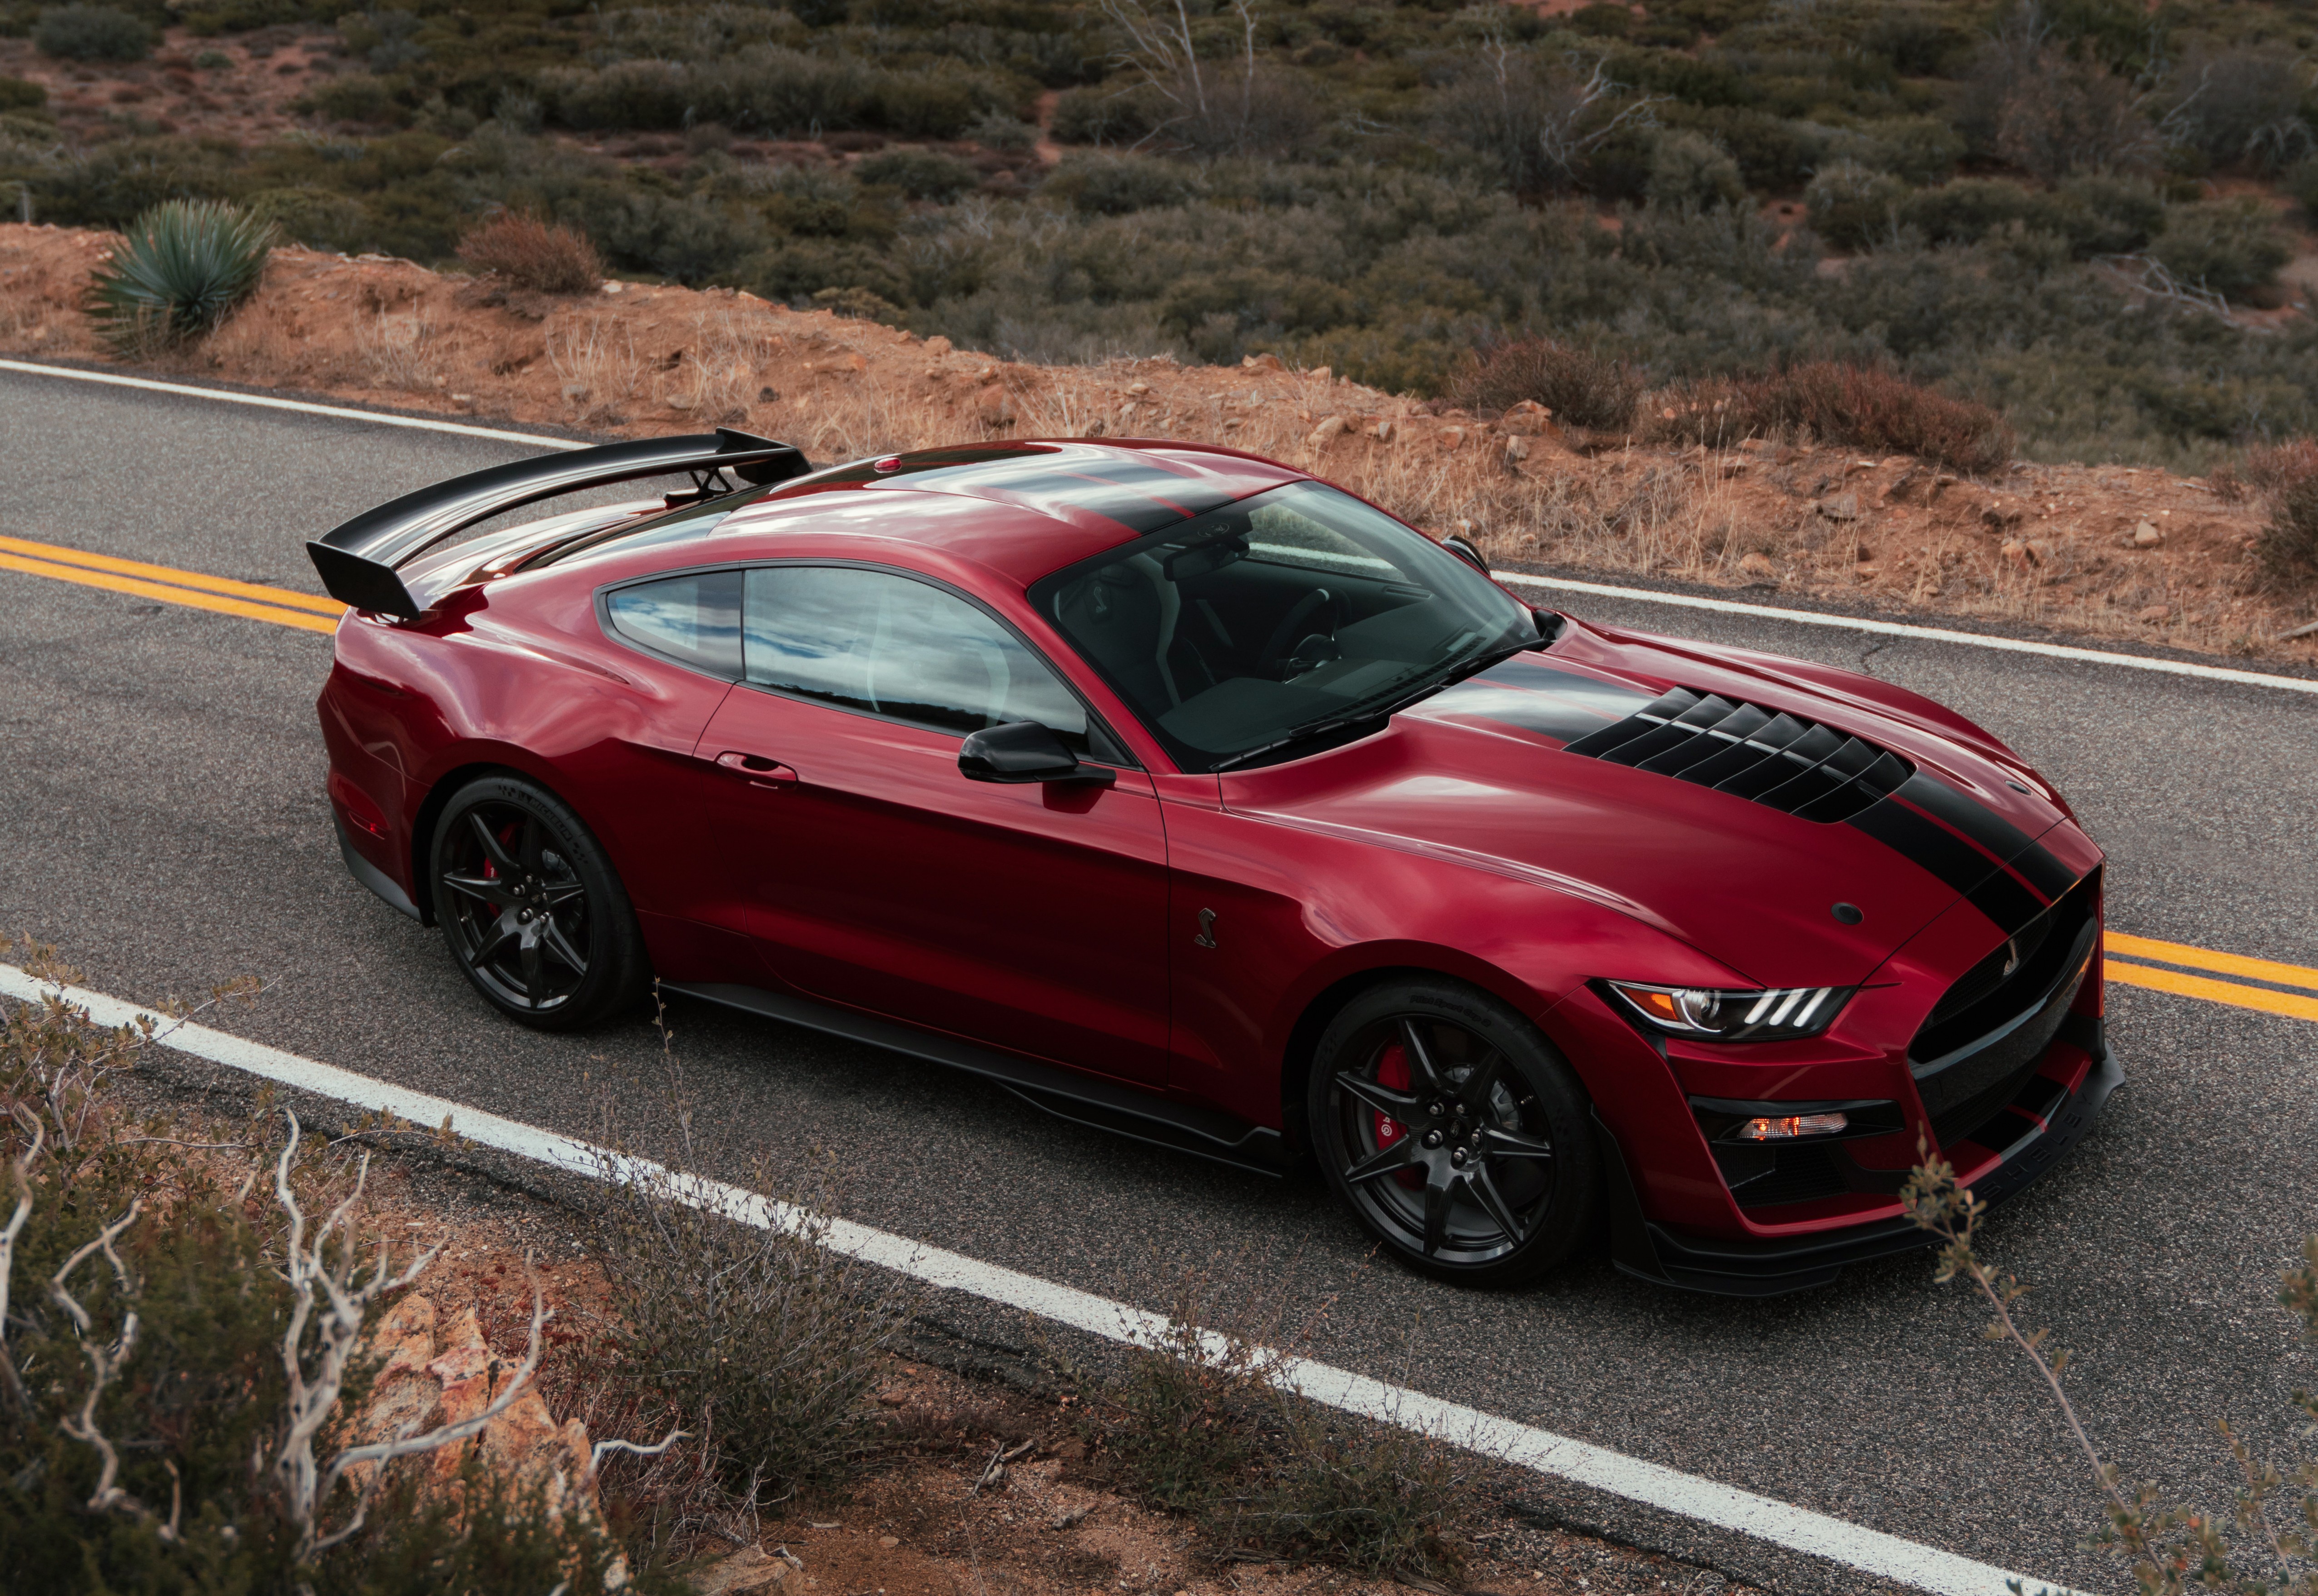 Car Ford Ford Mustang Ford Mustang Shelby Ford Mustang Shelby Gt500 Muscle Car Red Car 5102x3513